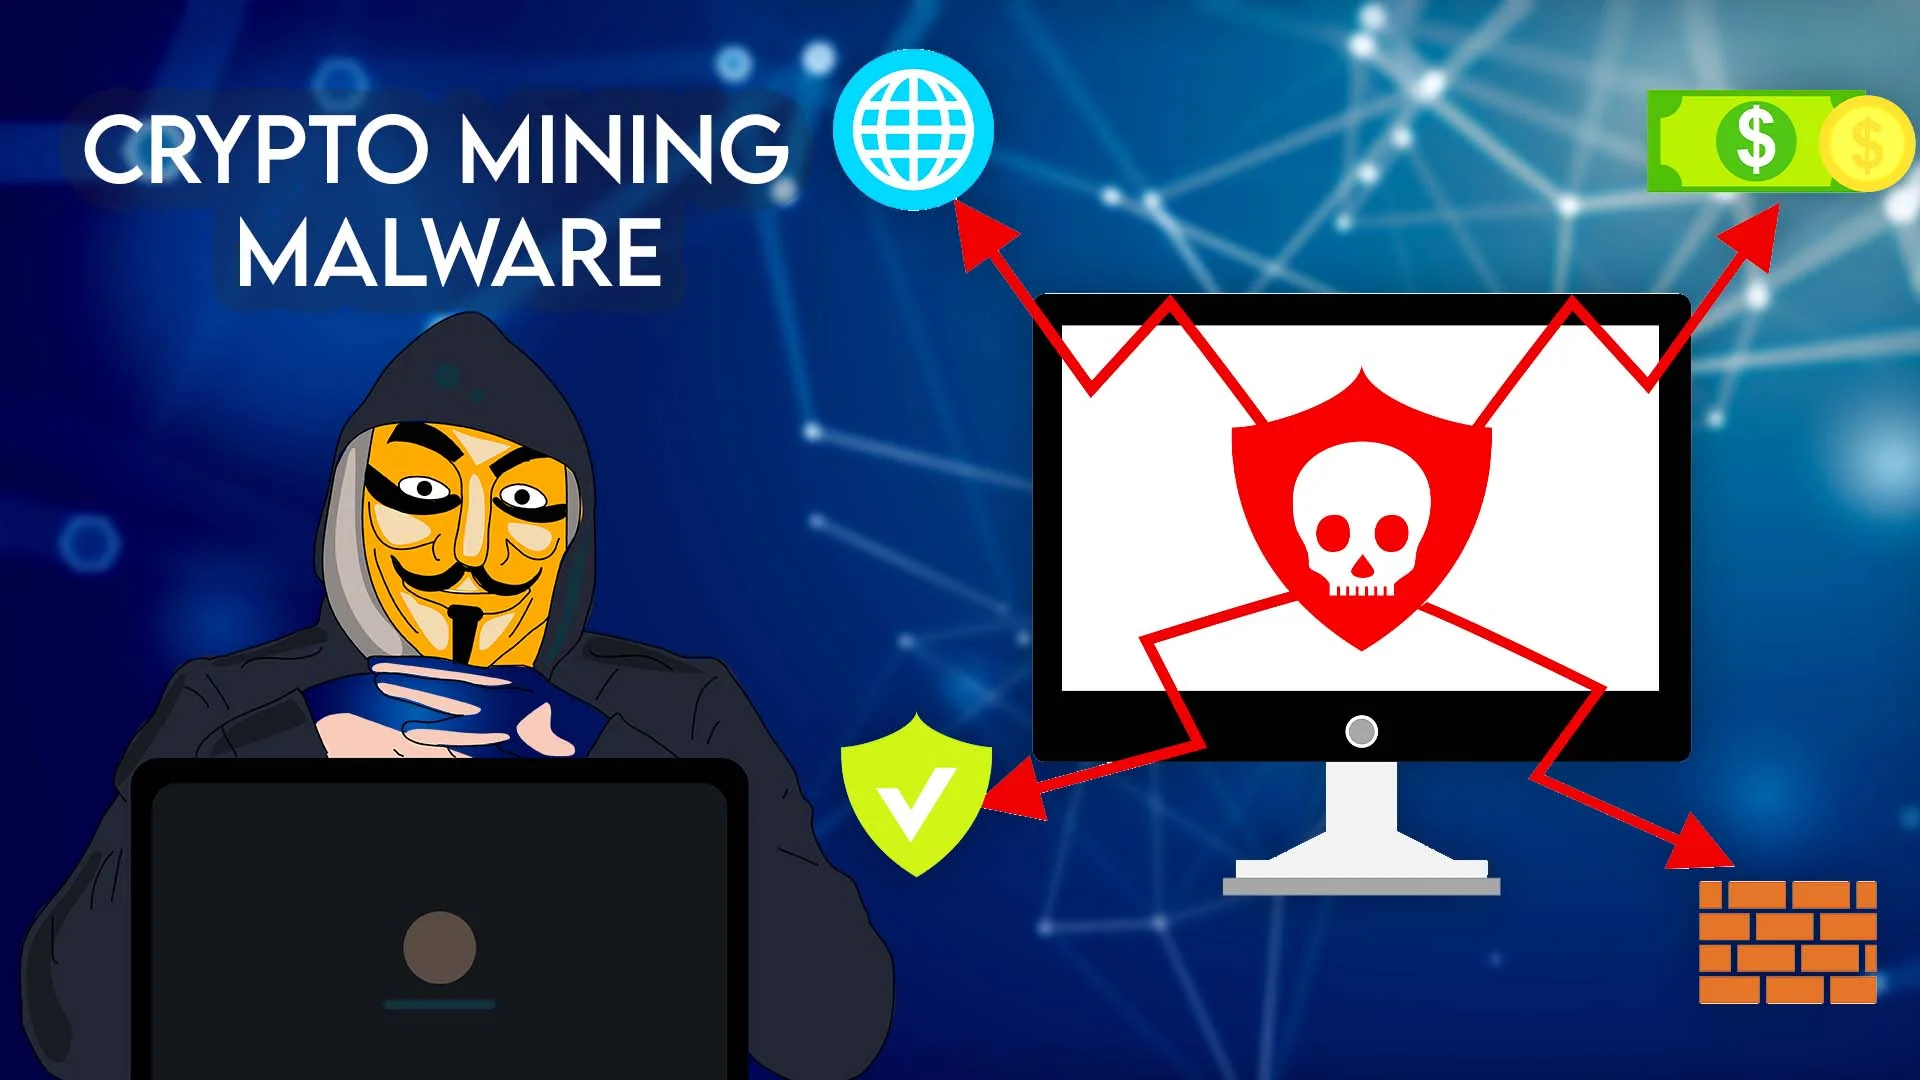 What Is Crypto Mining Malware?